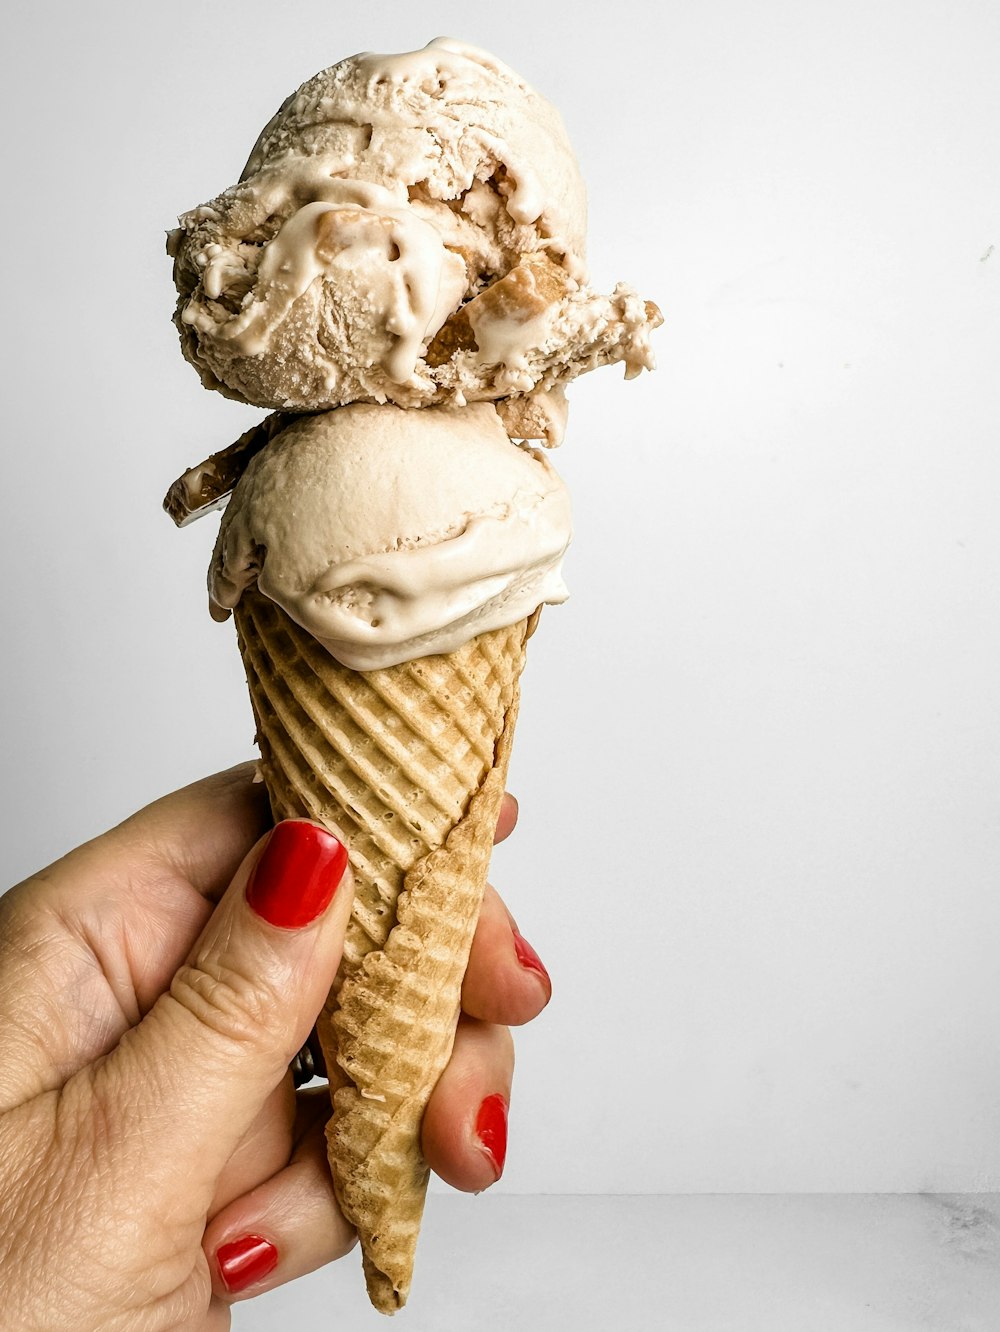 a hand holding an ice cream cone with two scoops